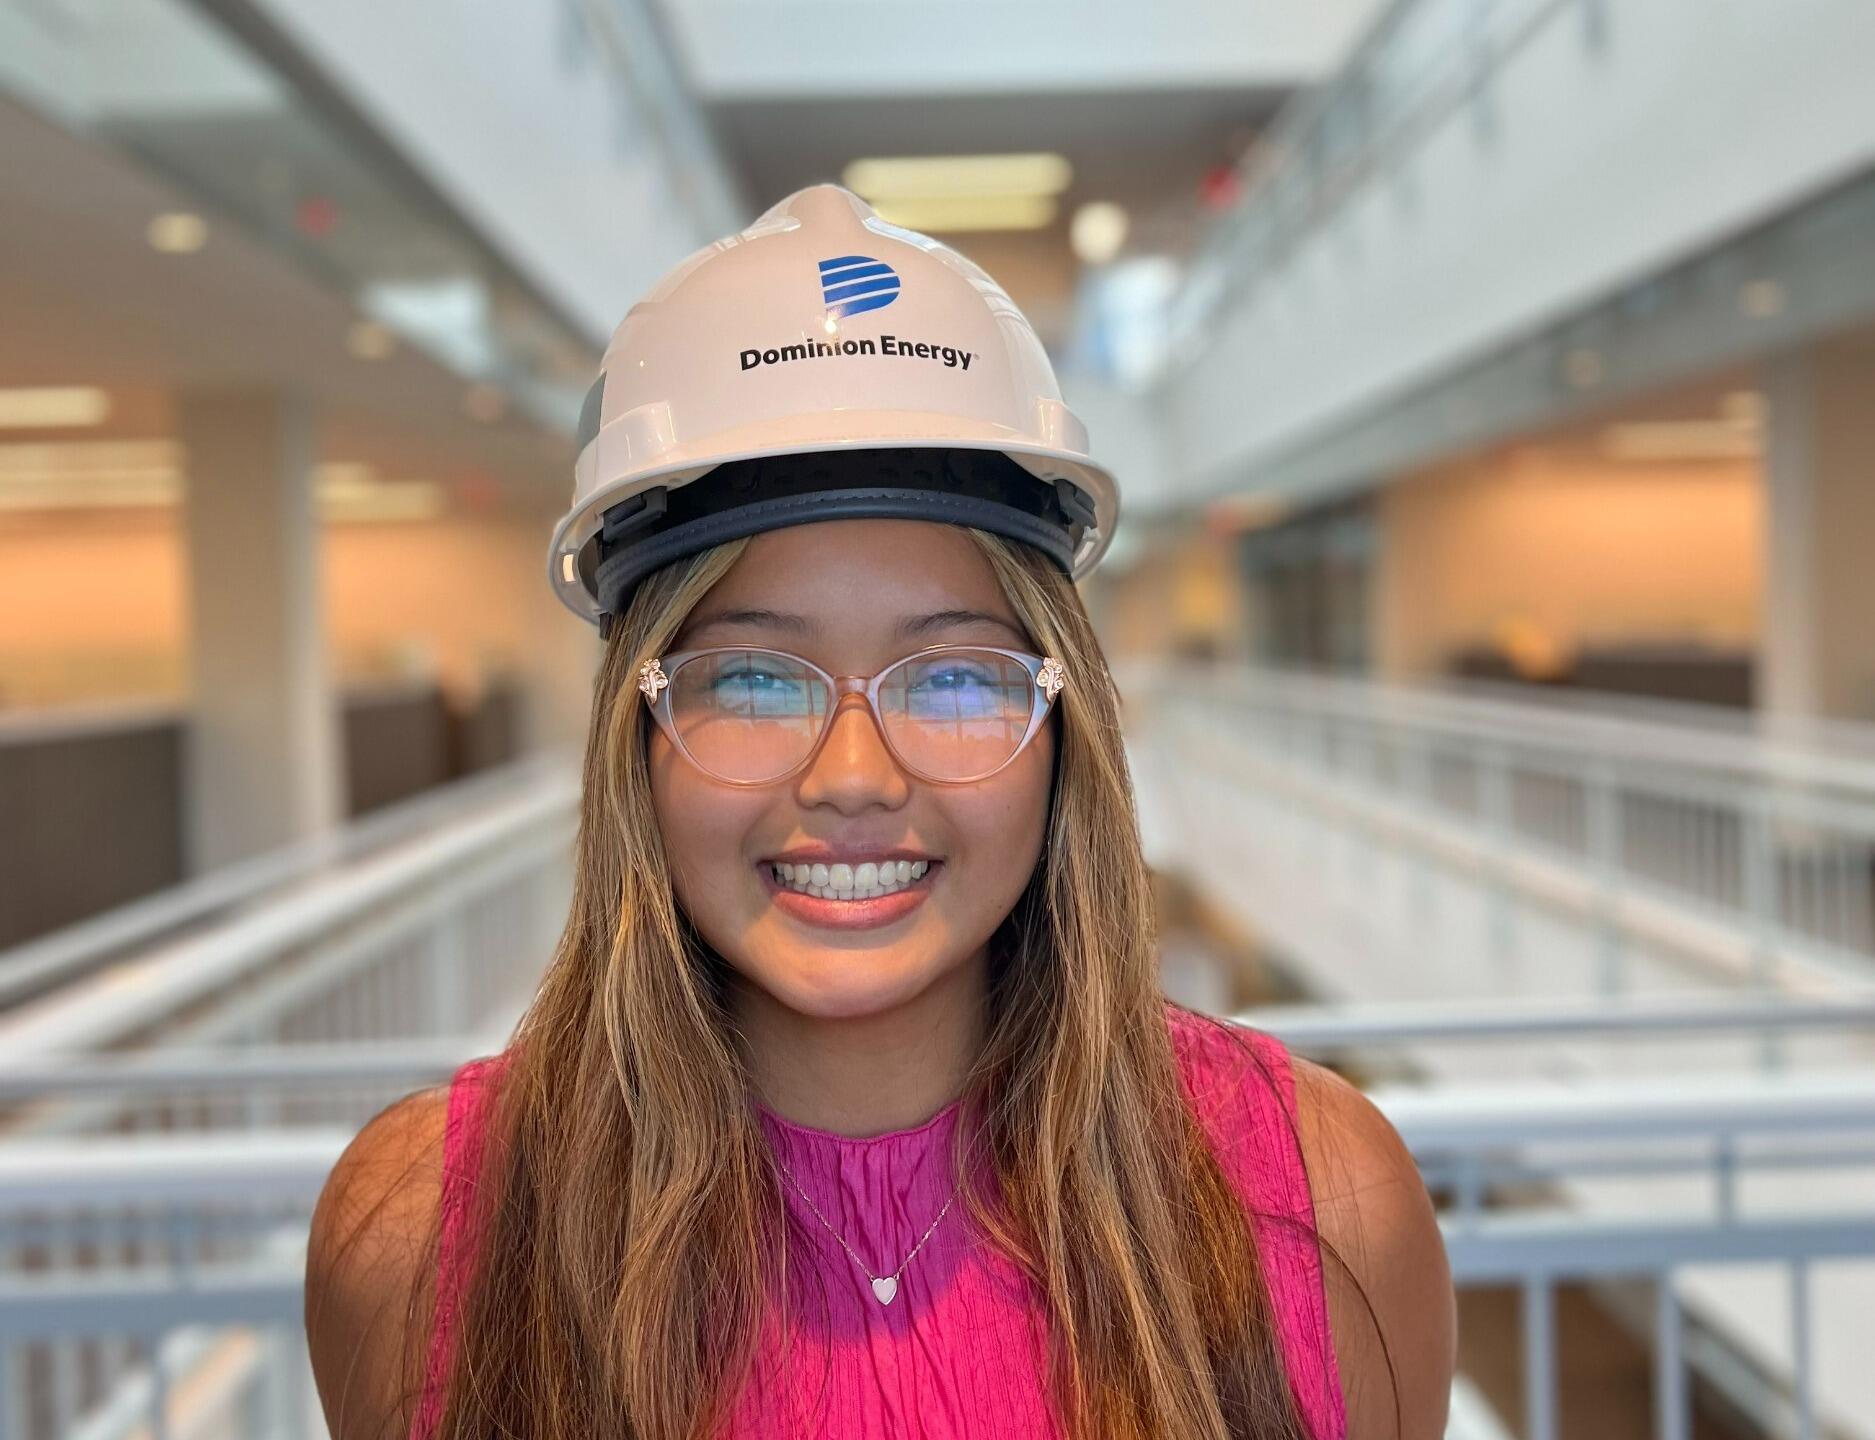 A photo of a woman wearing a hard hat and safety glasses. 